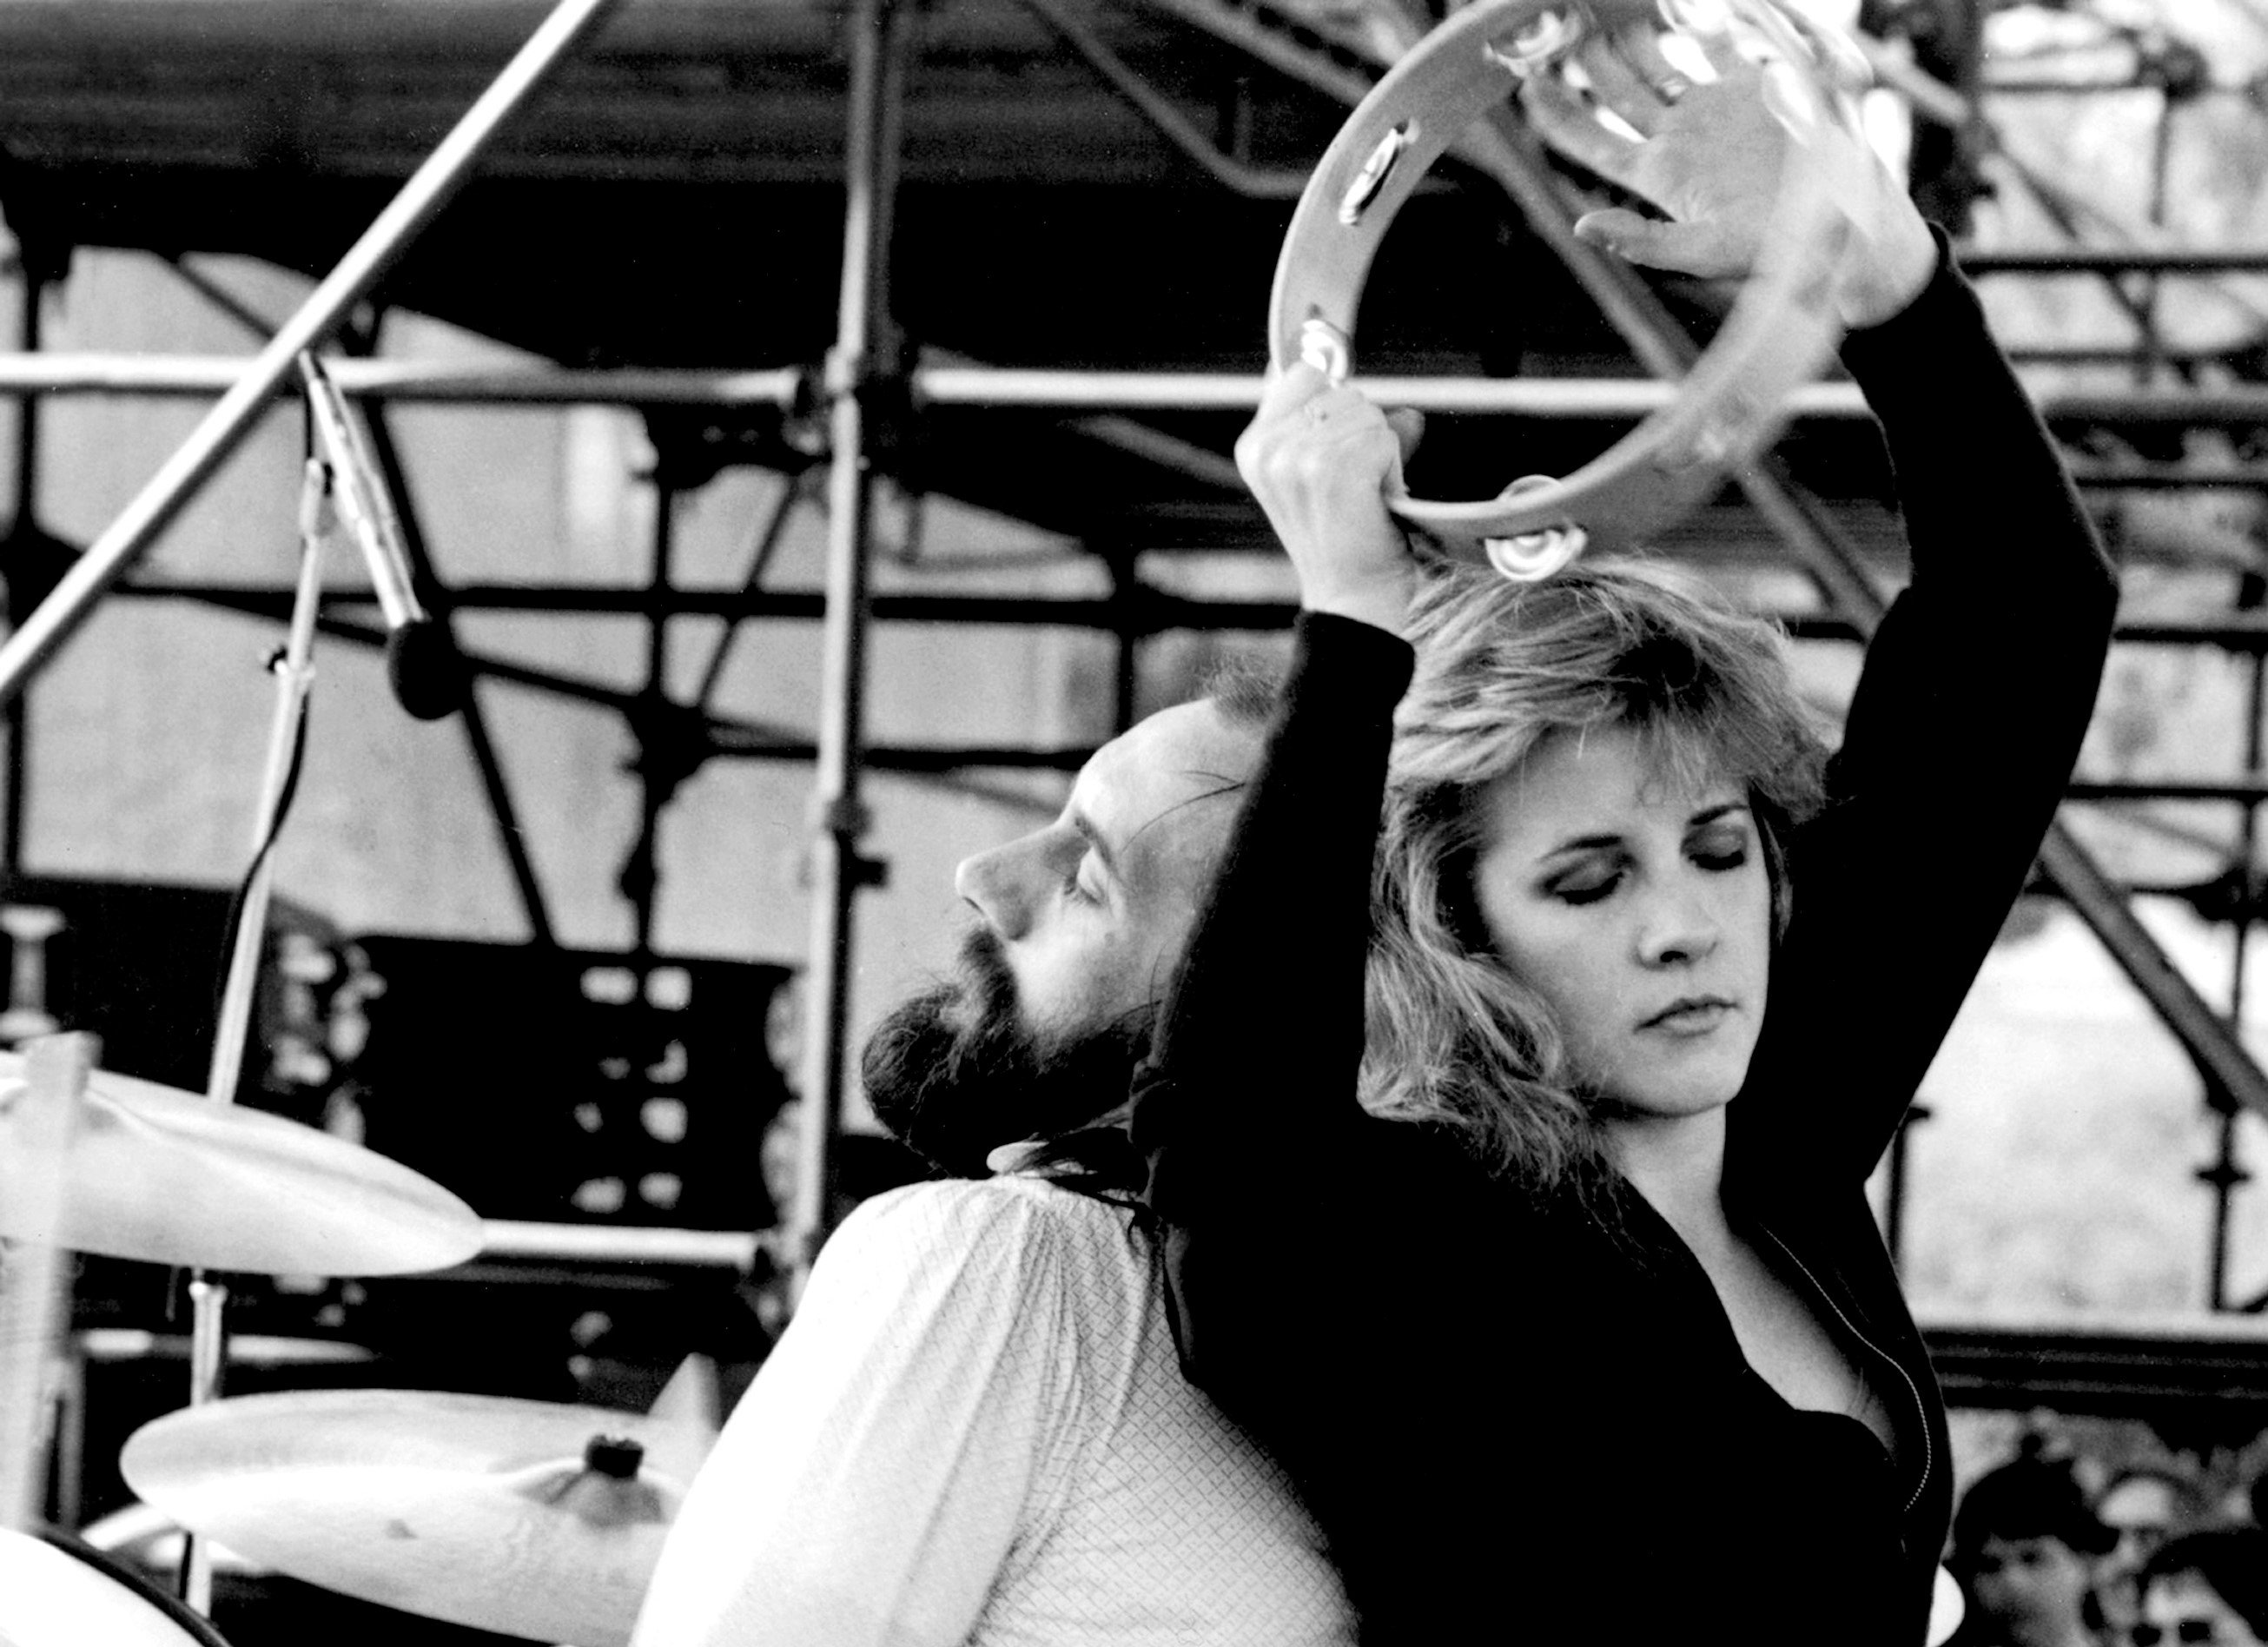 Mick Fleetwood and Stevie Nicks stand back to back while she holds a tambourine above her head.